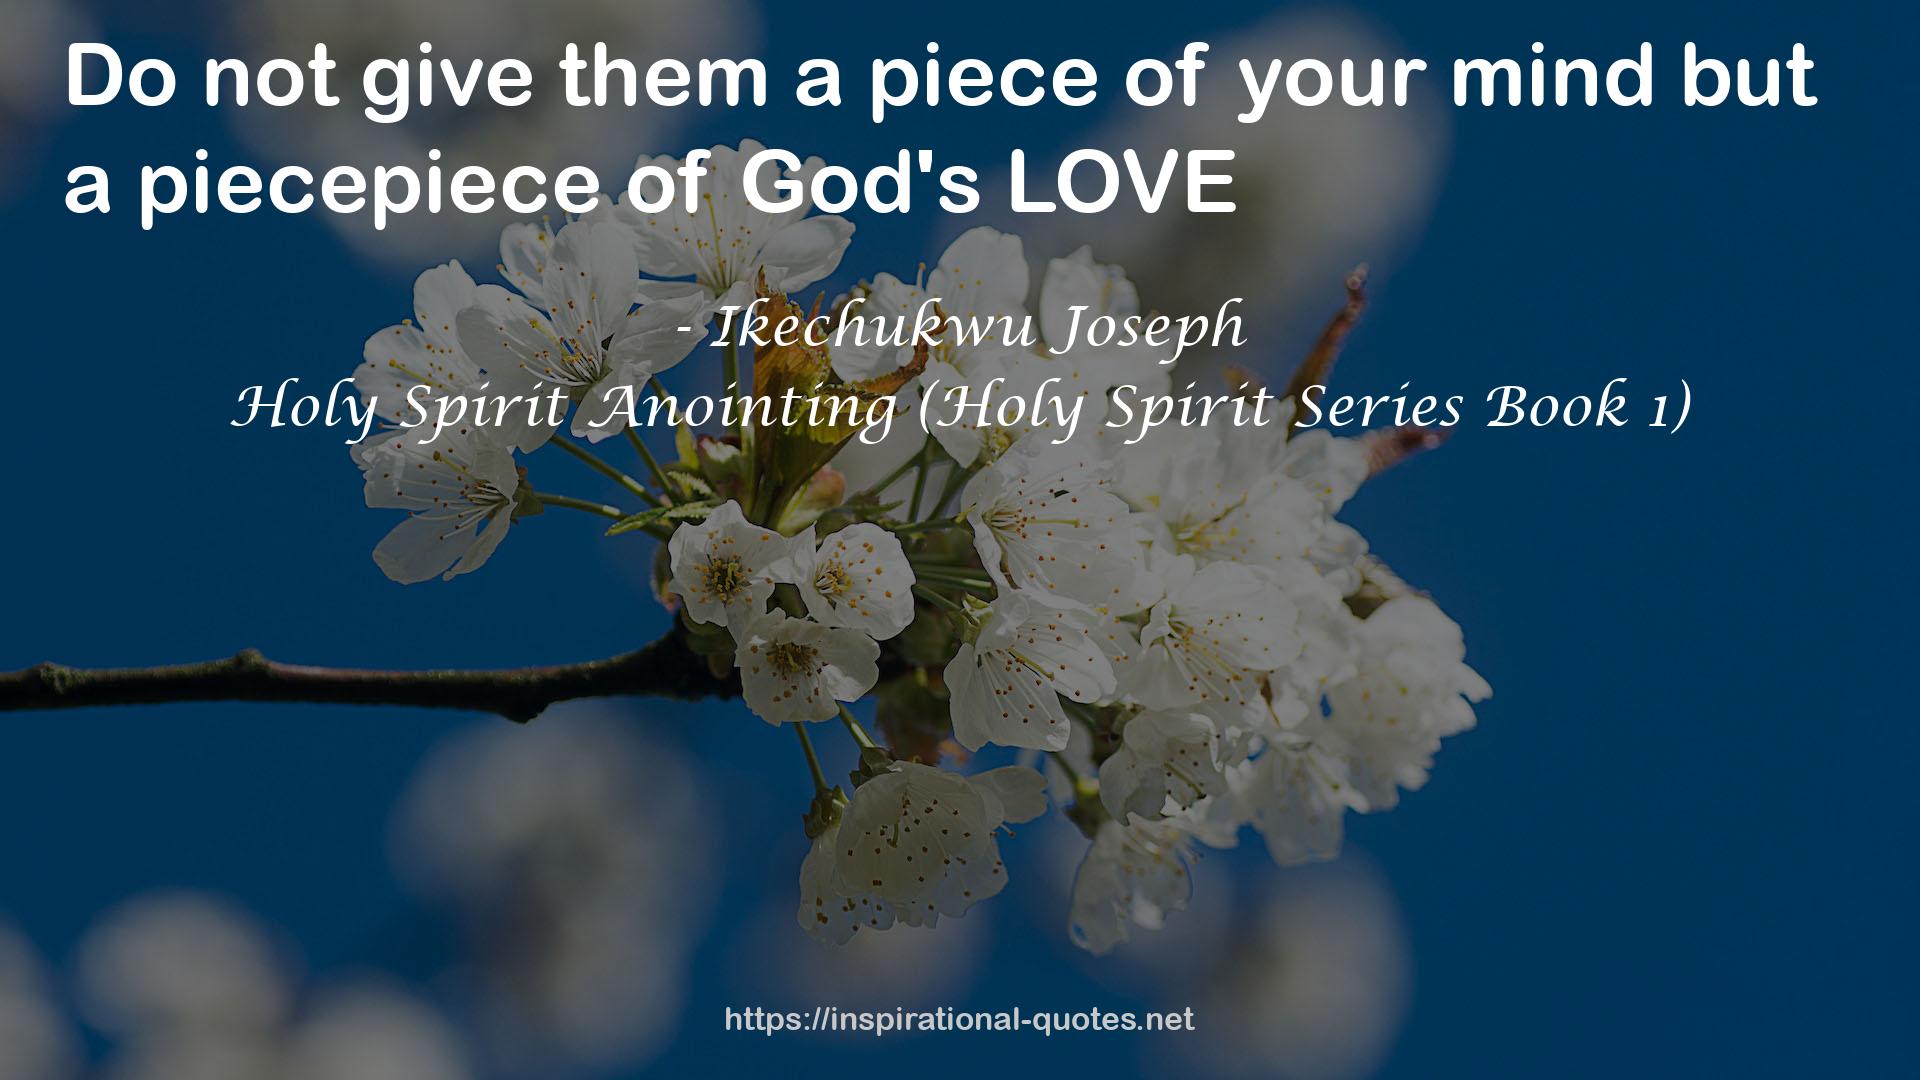 Holy Spirit Anointing (Holy Spirit Series Book 1) QUOTES